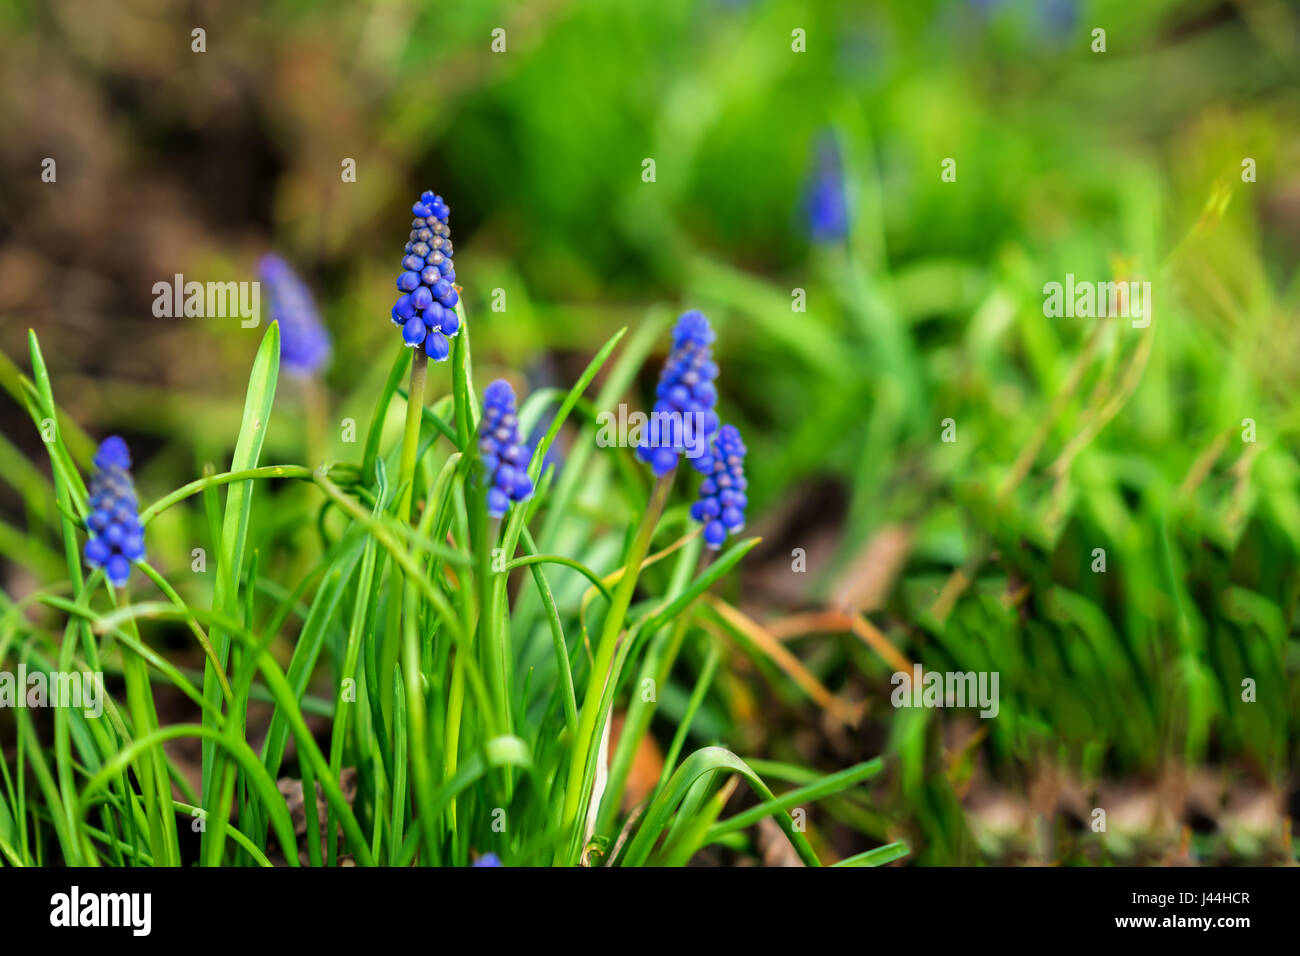 Natural flower background. Beautiful muscari hyacinth blooming on a green lawn in garden or in park close-up, copy space, selective focus. Concept of spring, seasons. Stock Photo